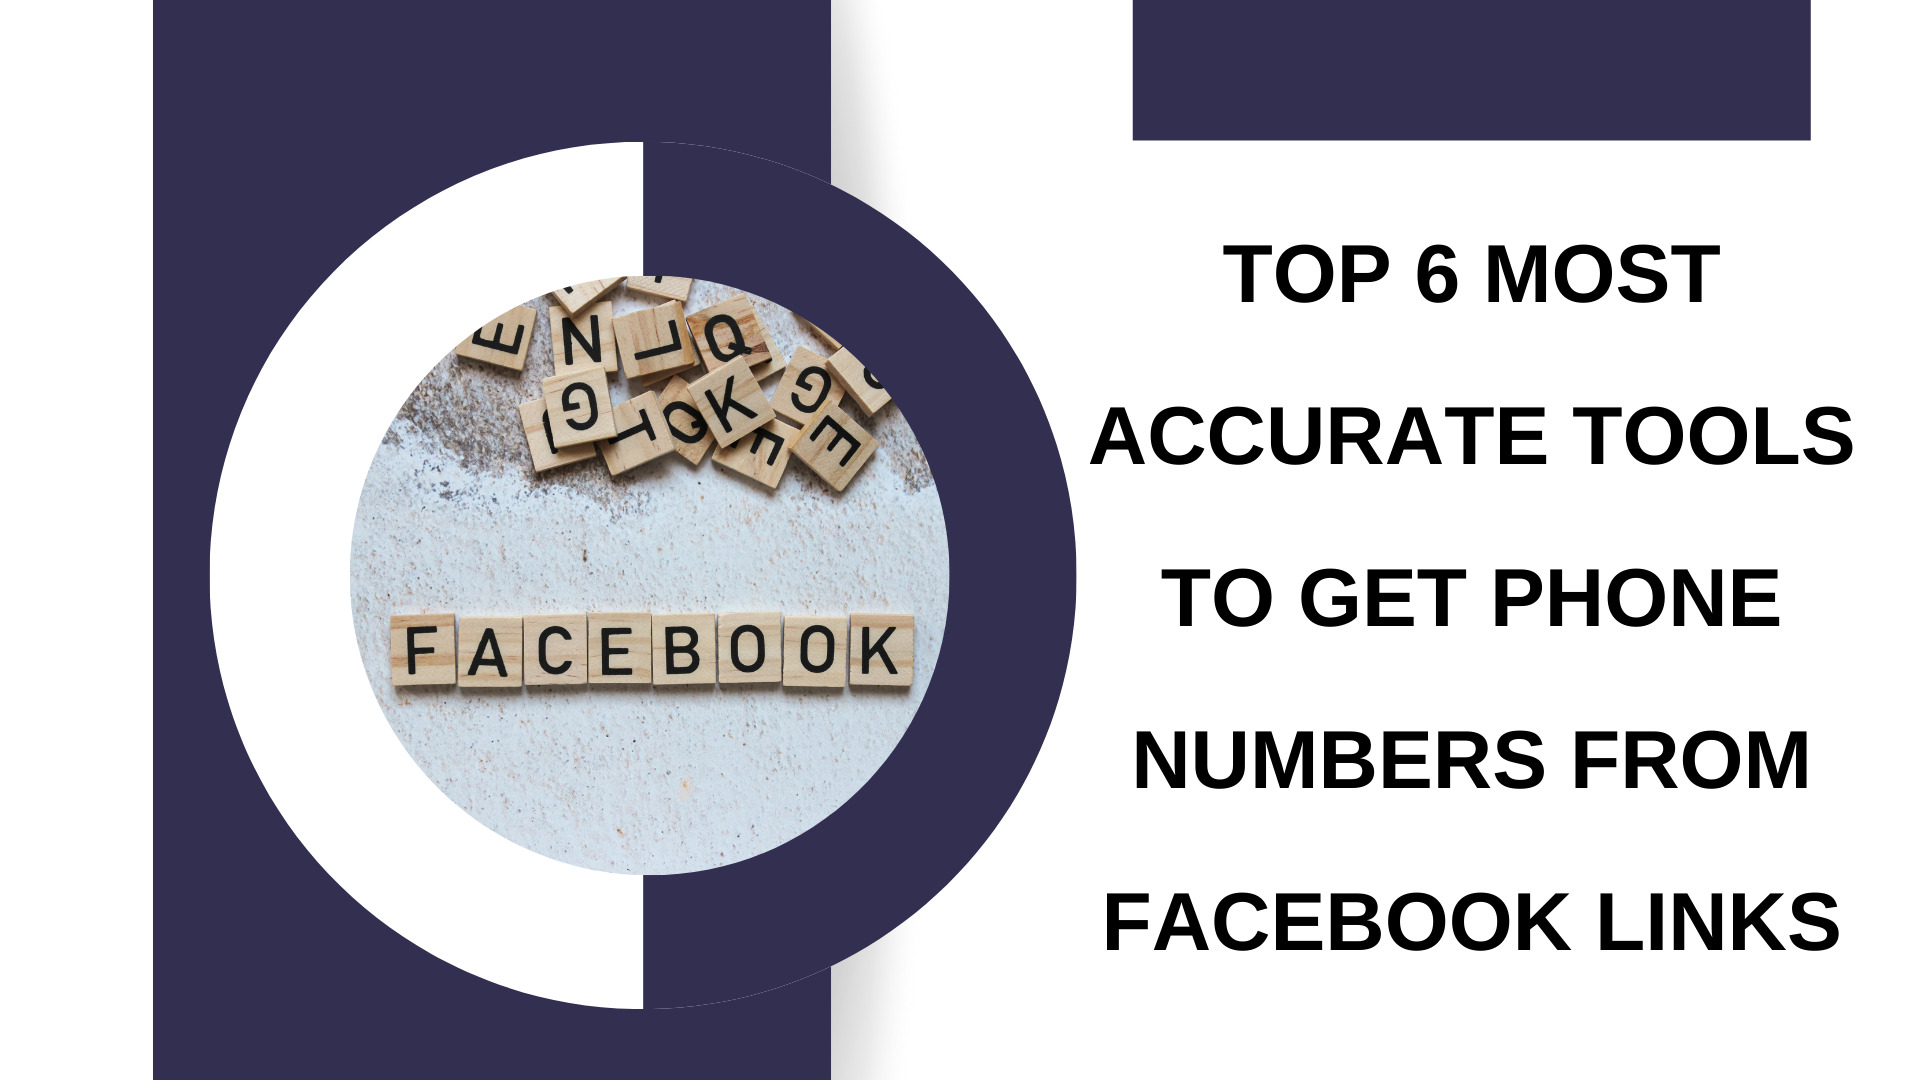 Top 6 most accurate tools to get phone numbers from Facebook links